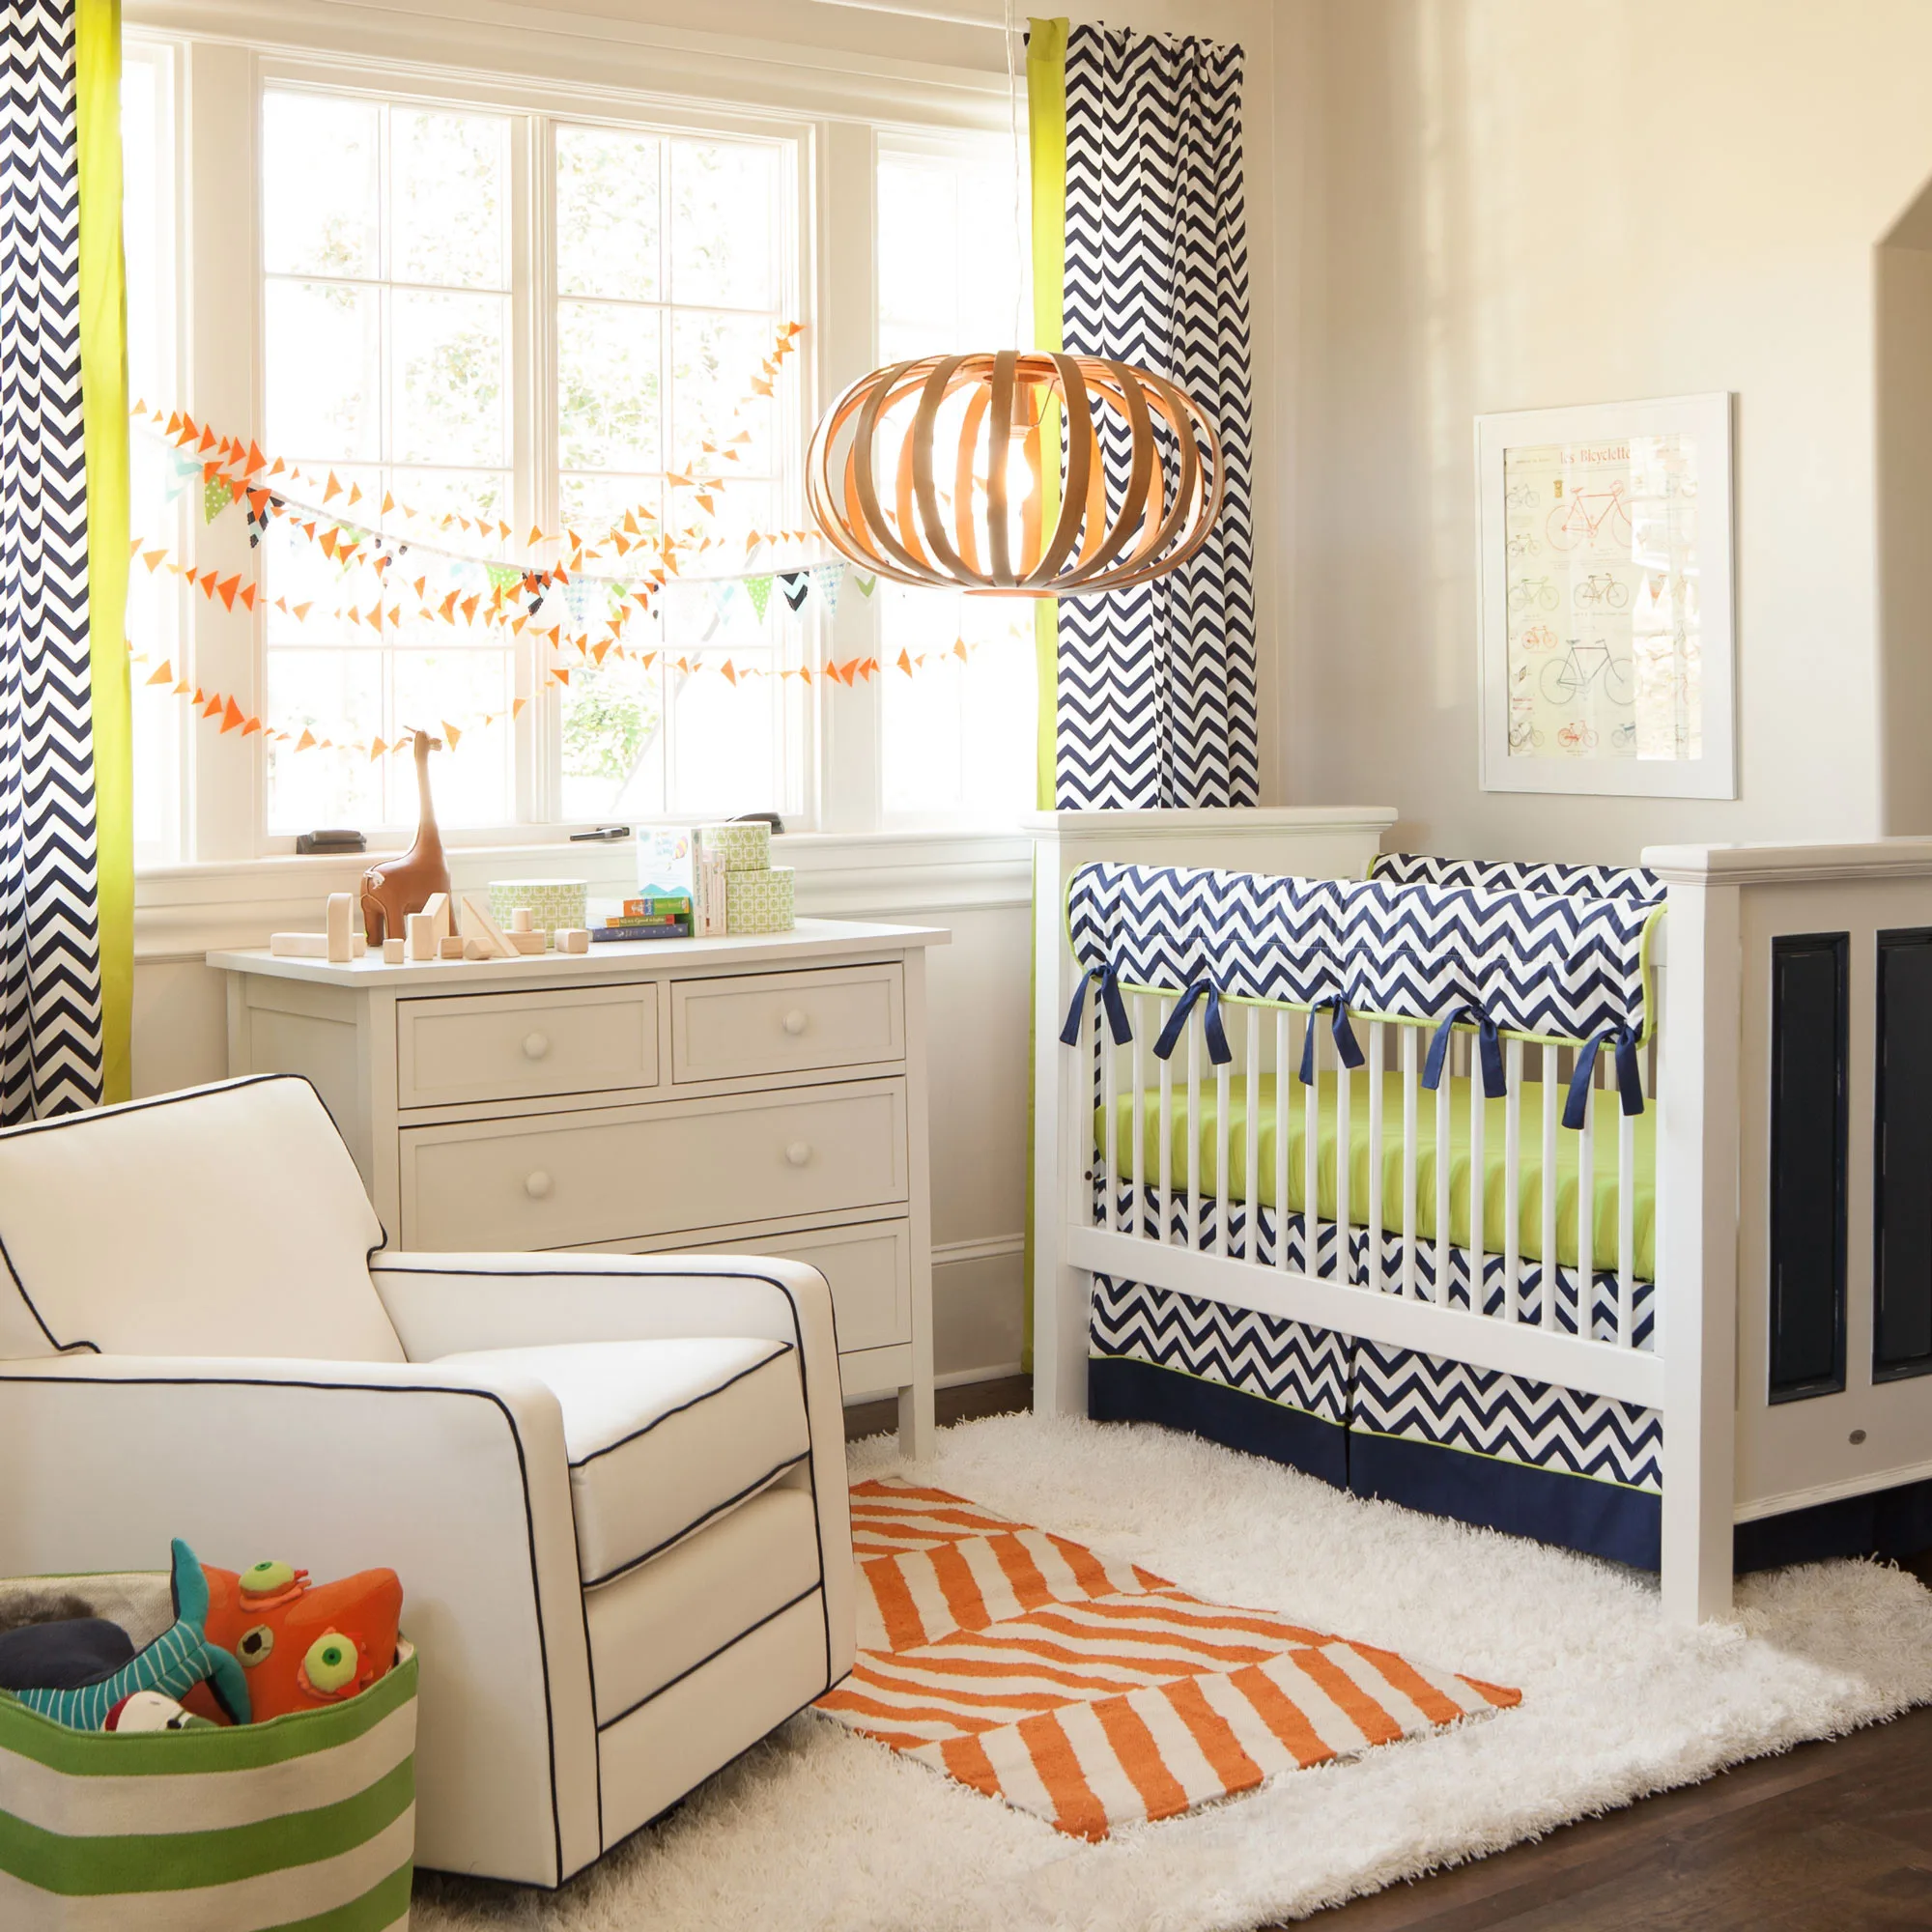 Navy and Citron Zig Zag Crib Bedding from Carousel Designs